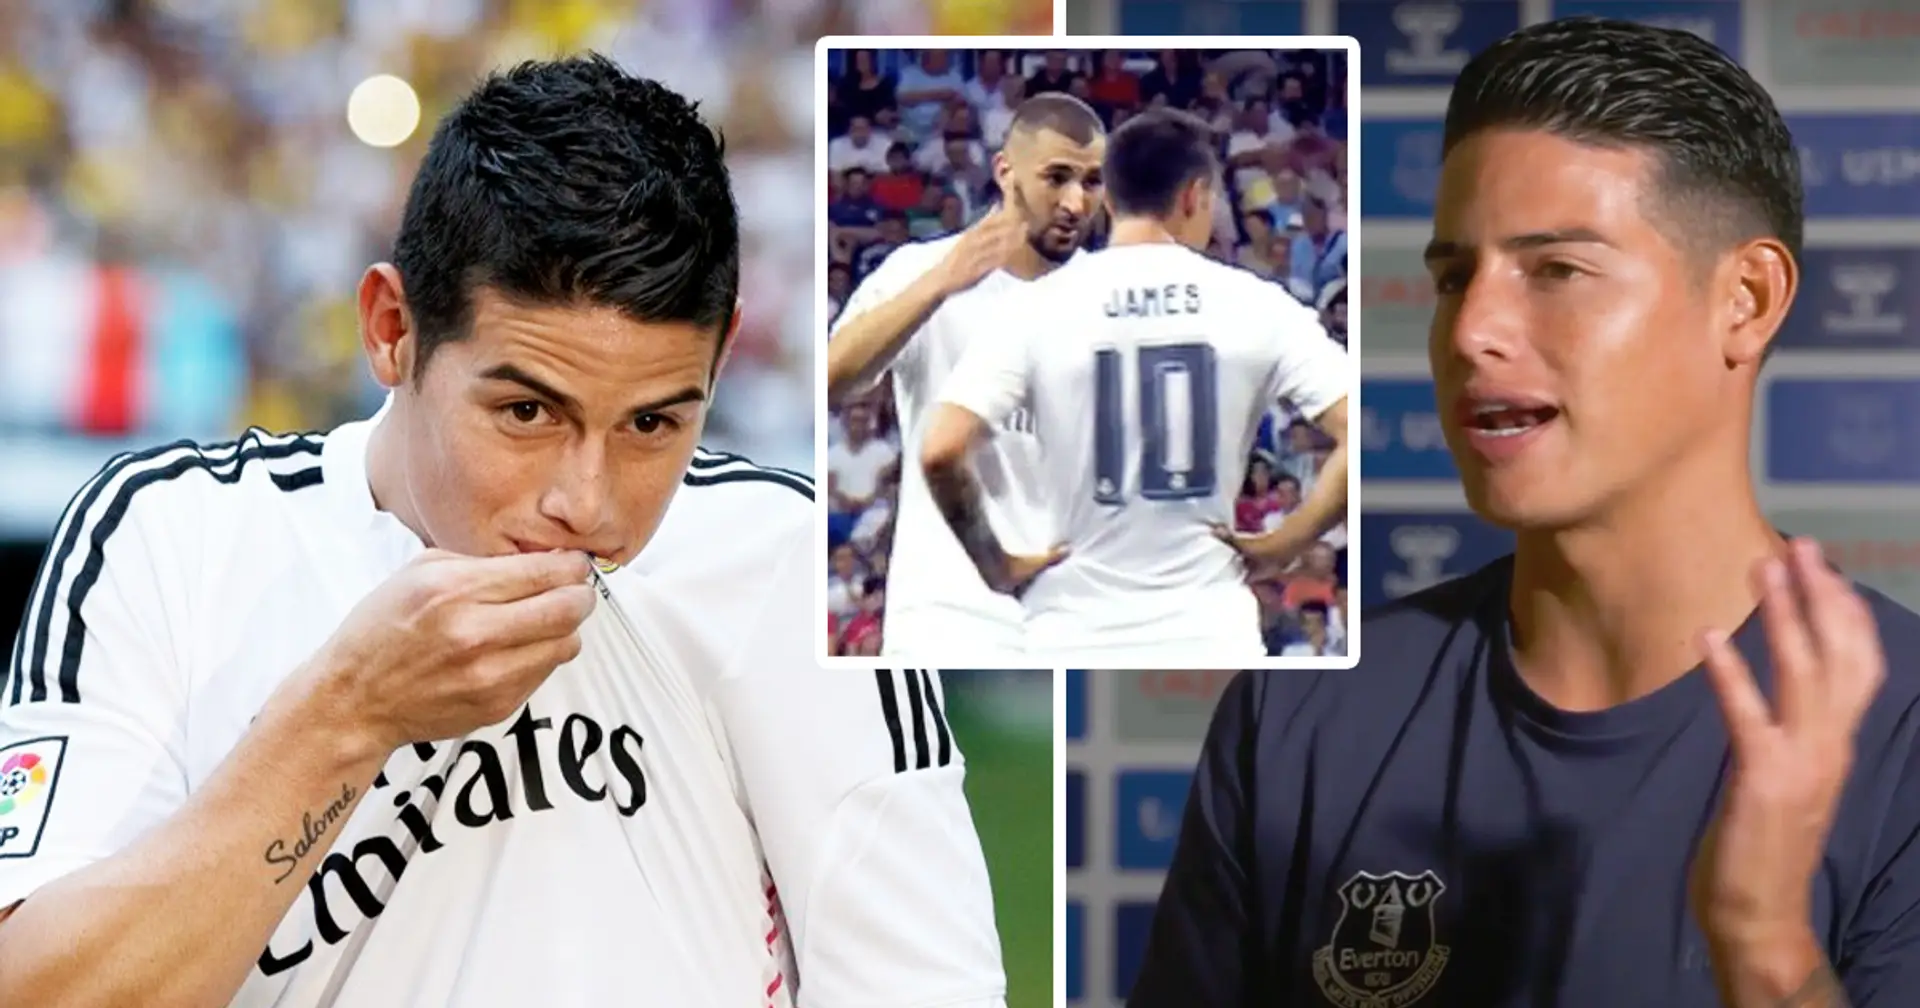 'I want Liverpool to be champions': James Rodriguez explains why he's supporting Liverpool in the Champions League final